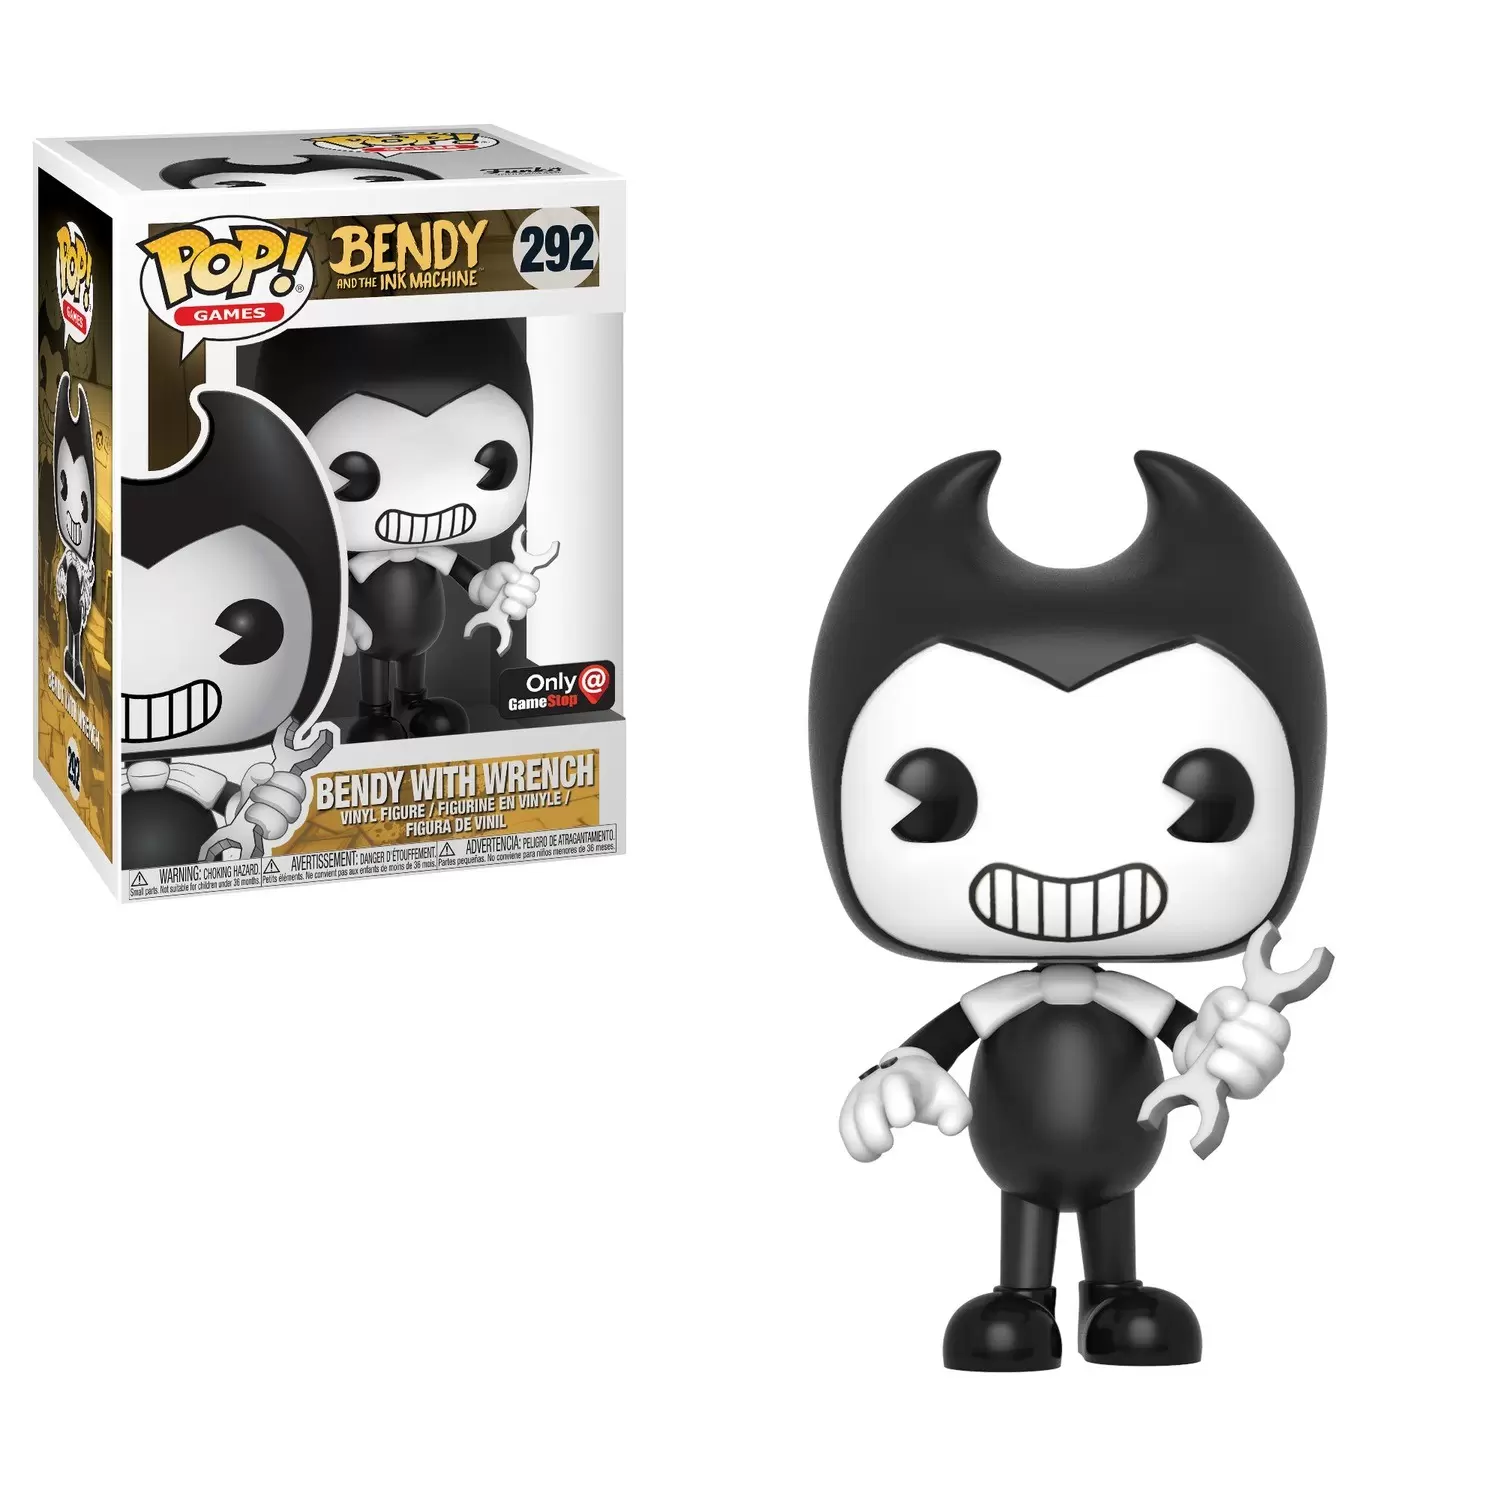 The location of the parts in Bendy and the Ink Machine